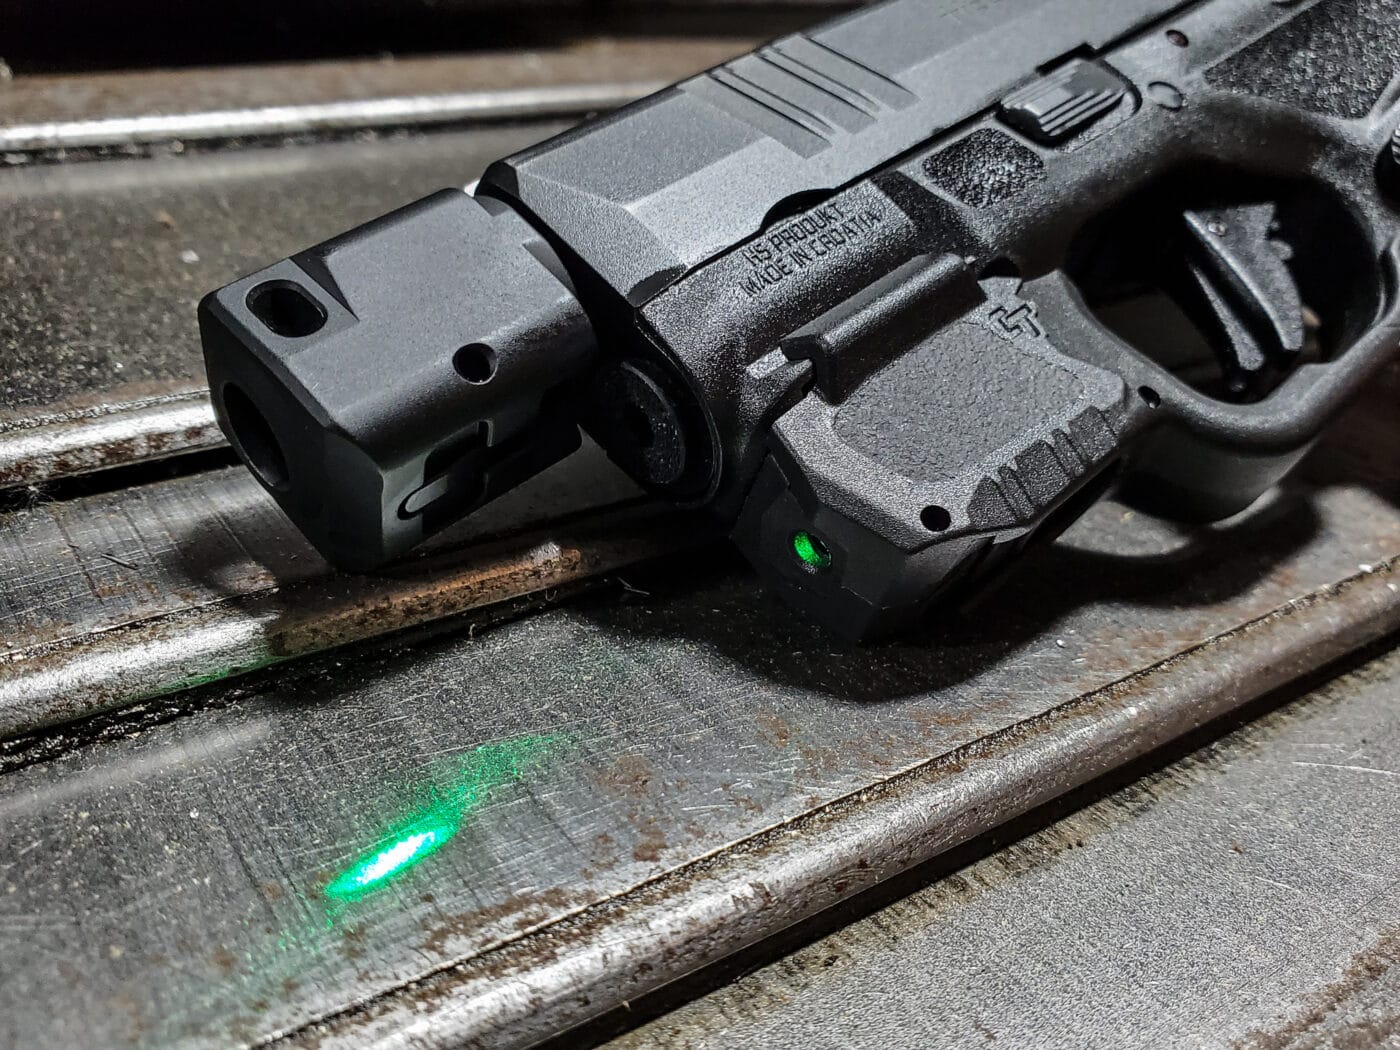 Green laser mounted on a Hellcat